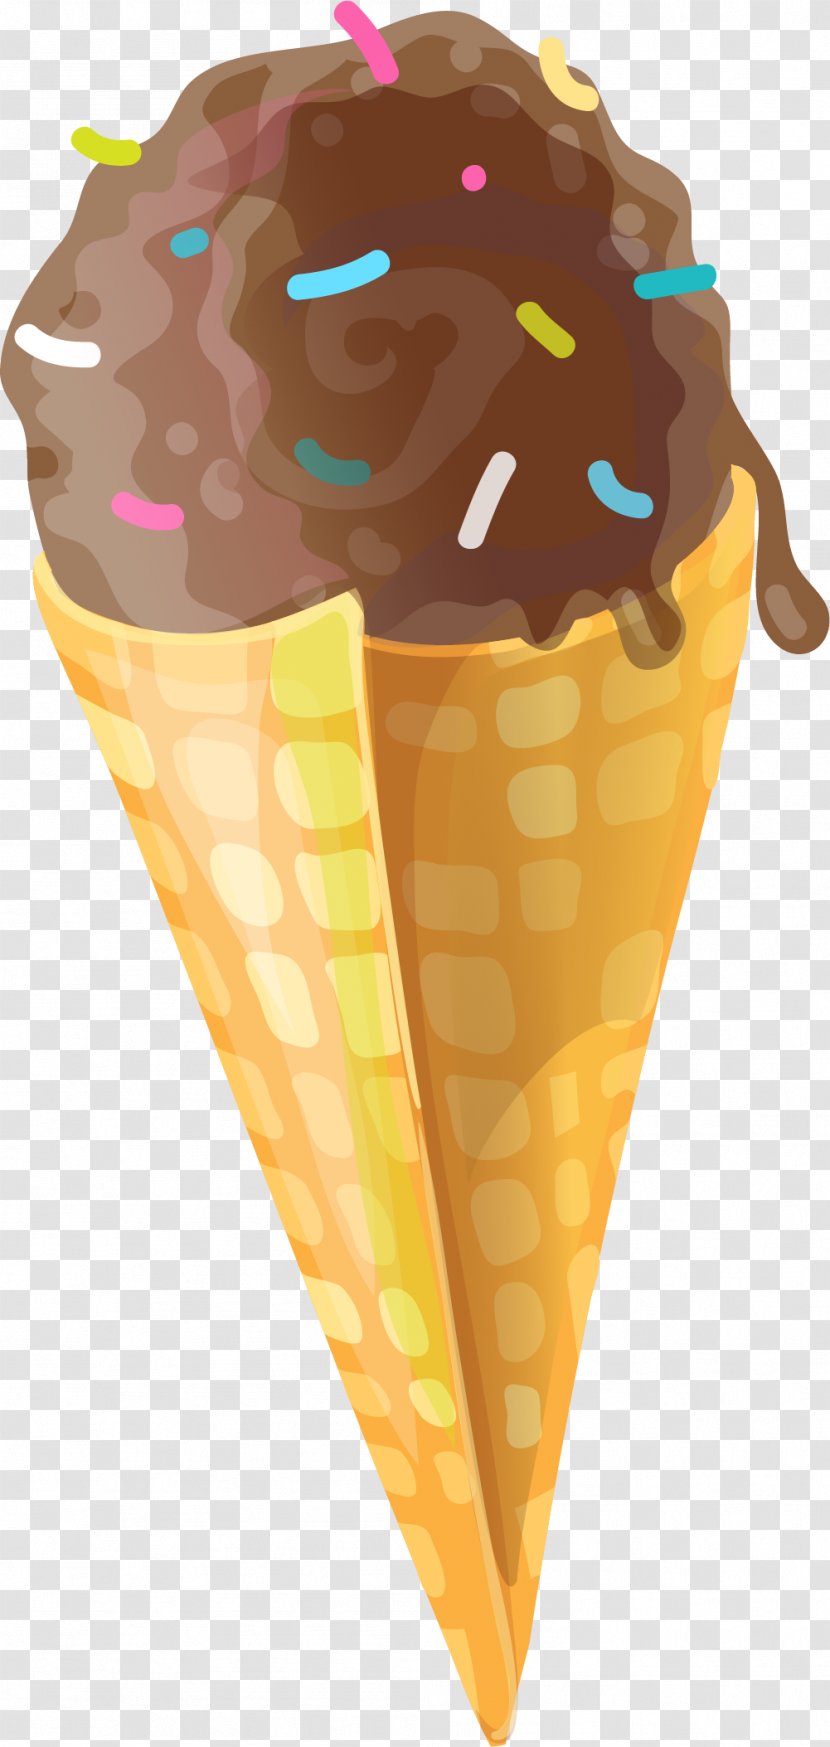 Chocolate Ice Cream - Dairy Product Transparent PNG